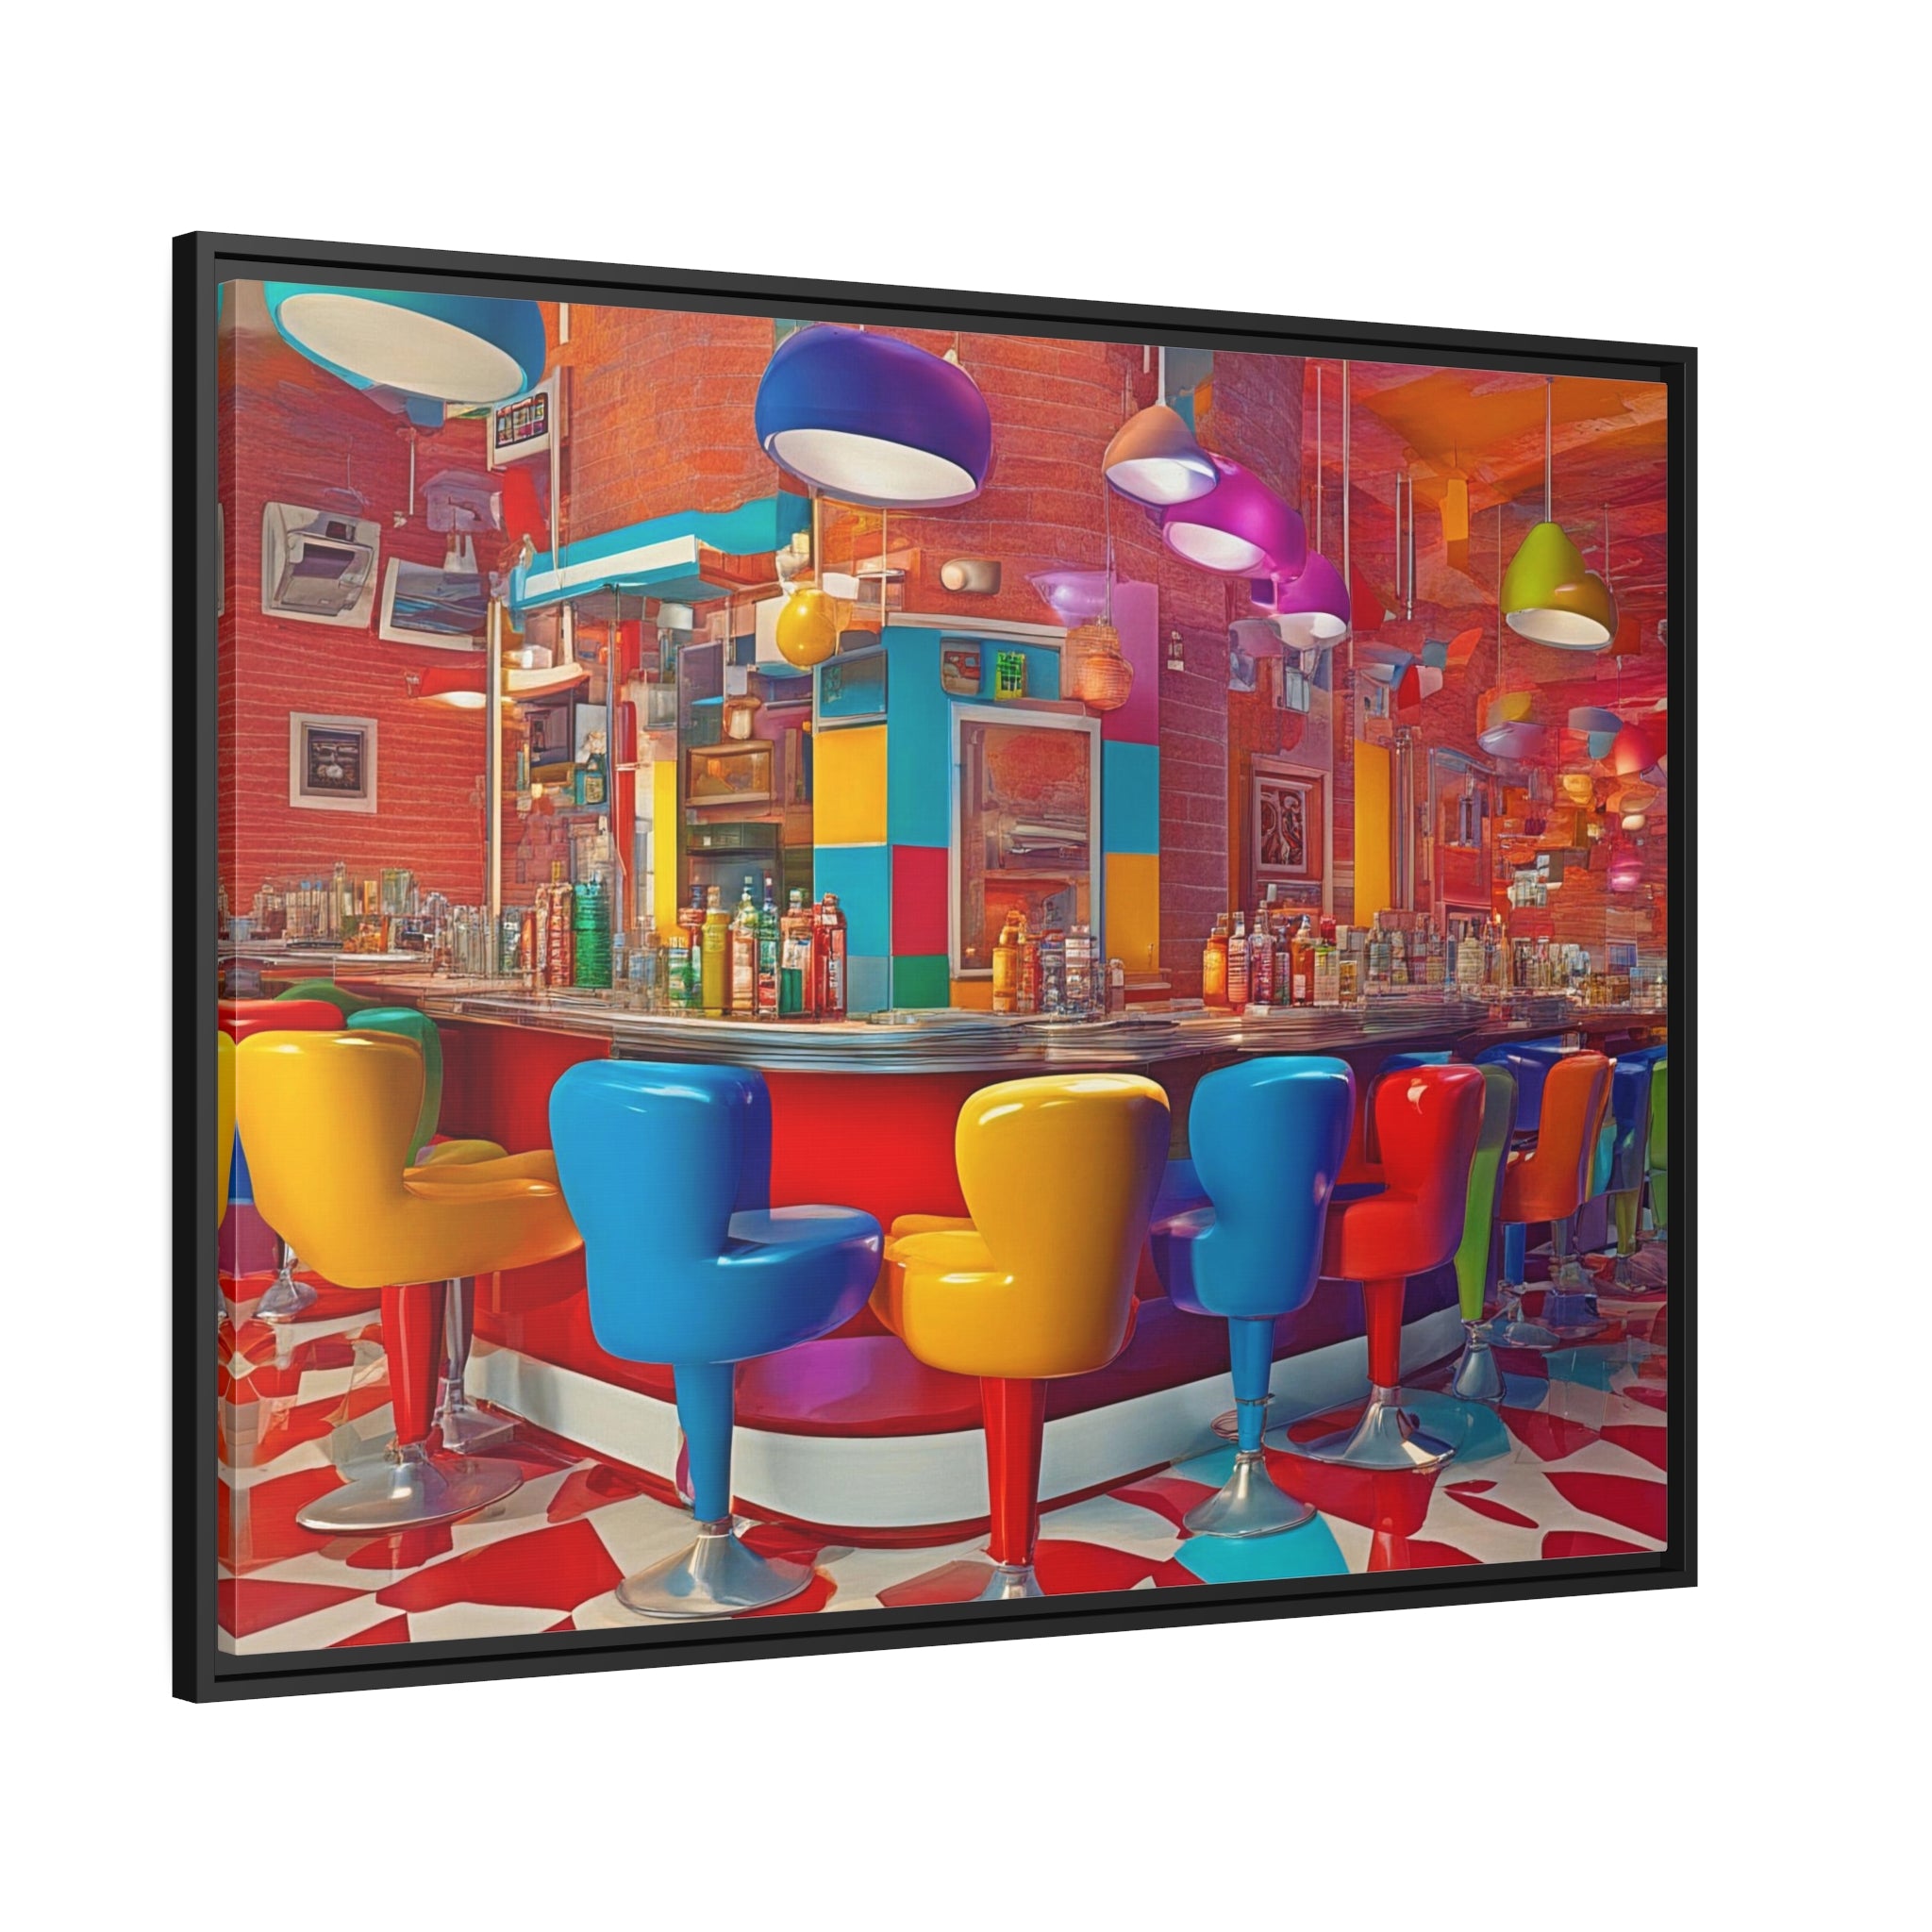 Wall Art DINER Canvas Print Painting Giclee 40x30 + Frame Love Pop Art Beauty Fun Design House Home Office Decor Gift Ready to Hang